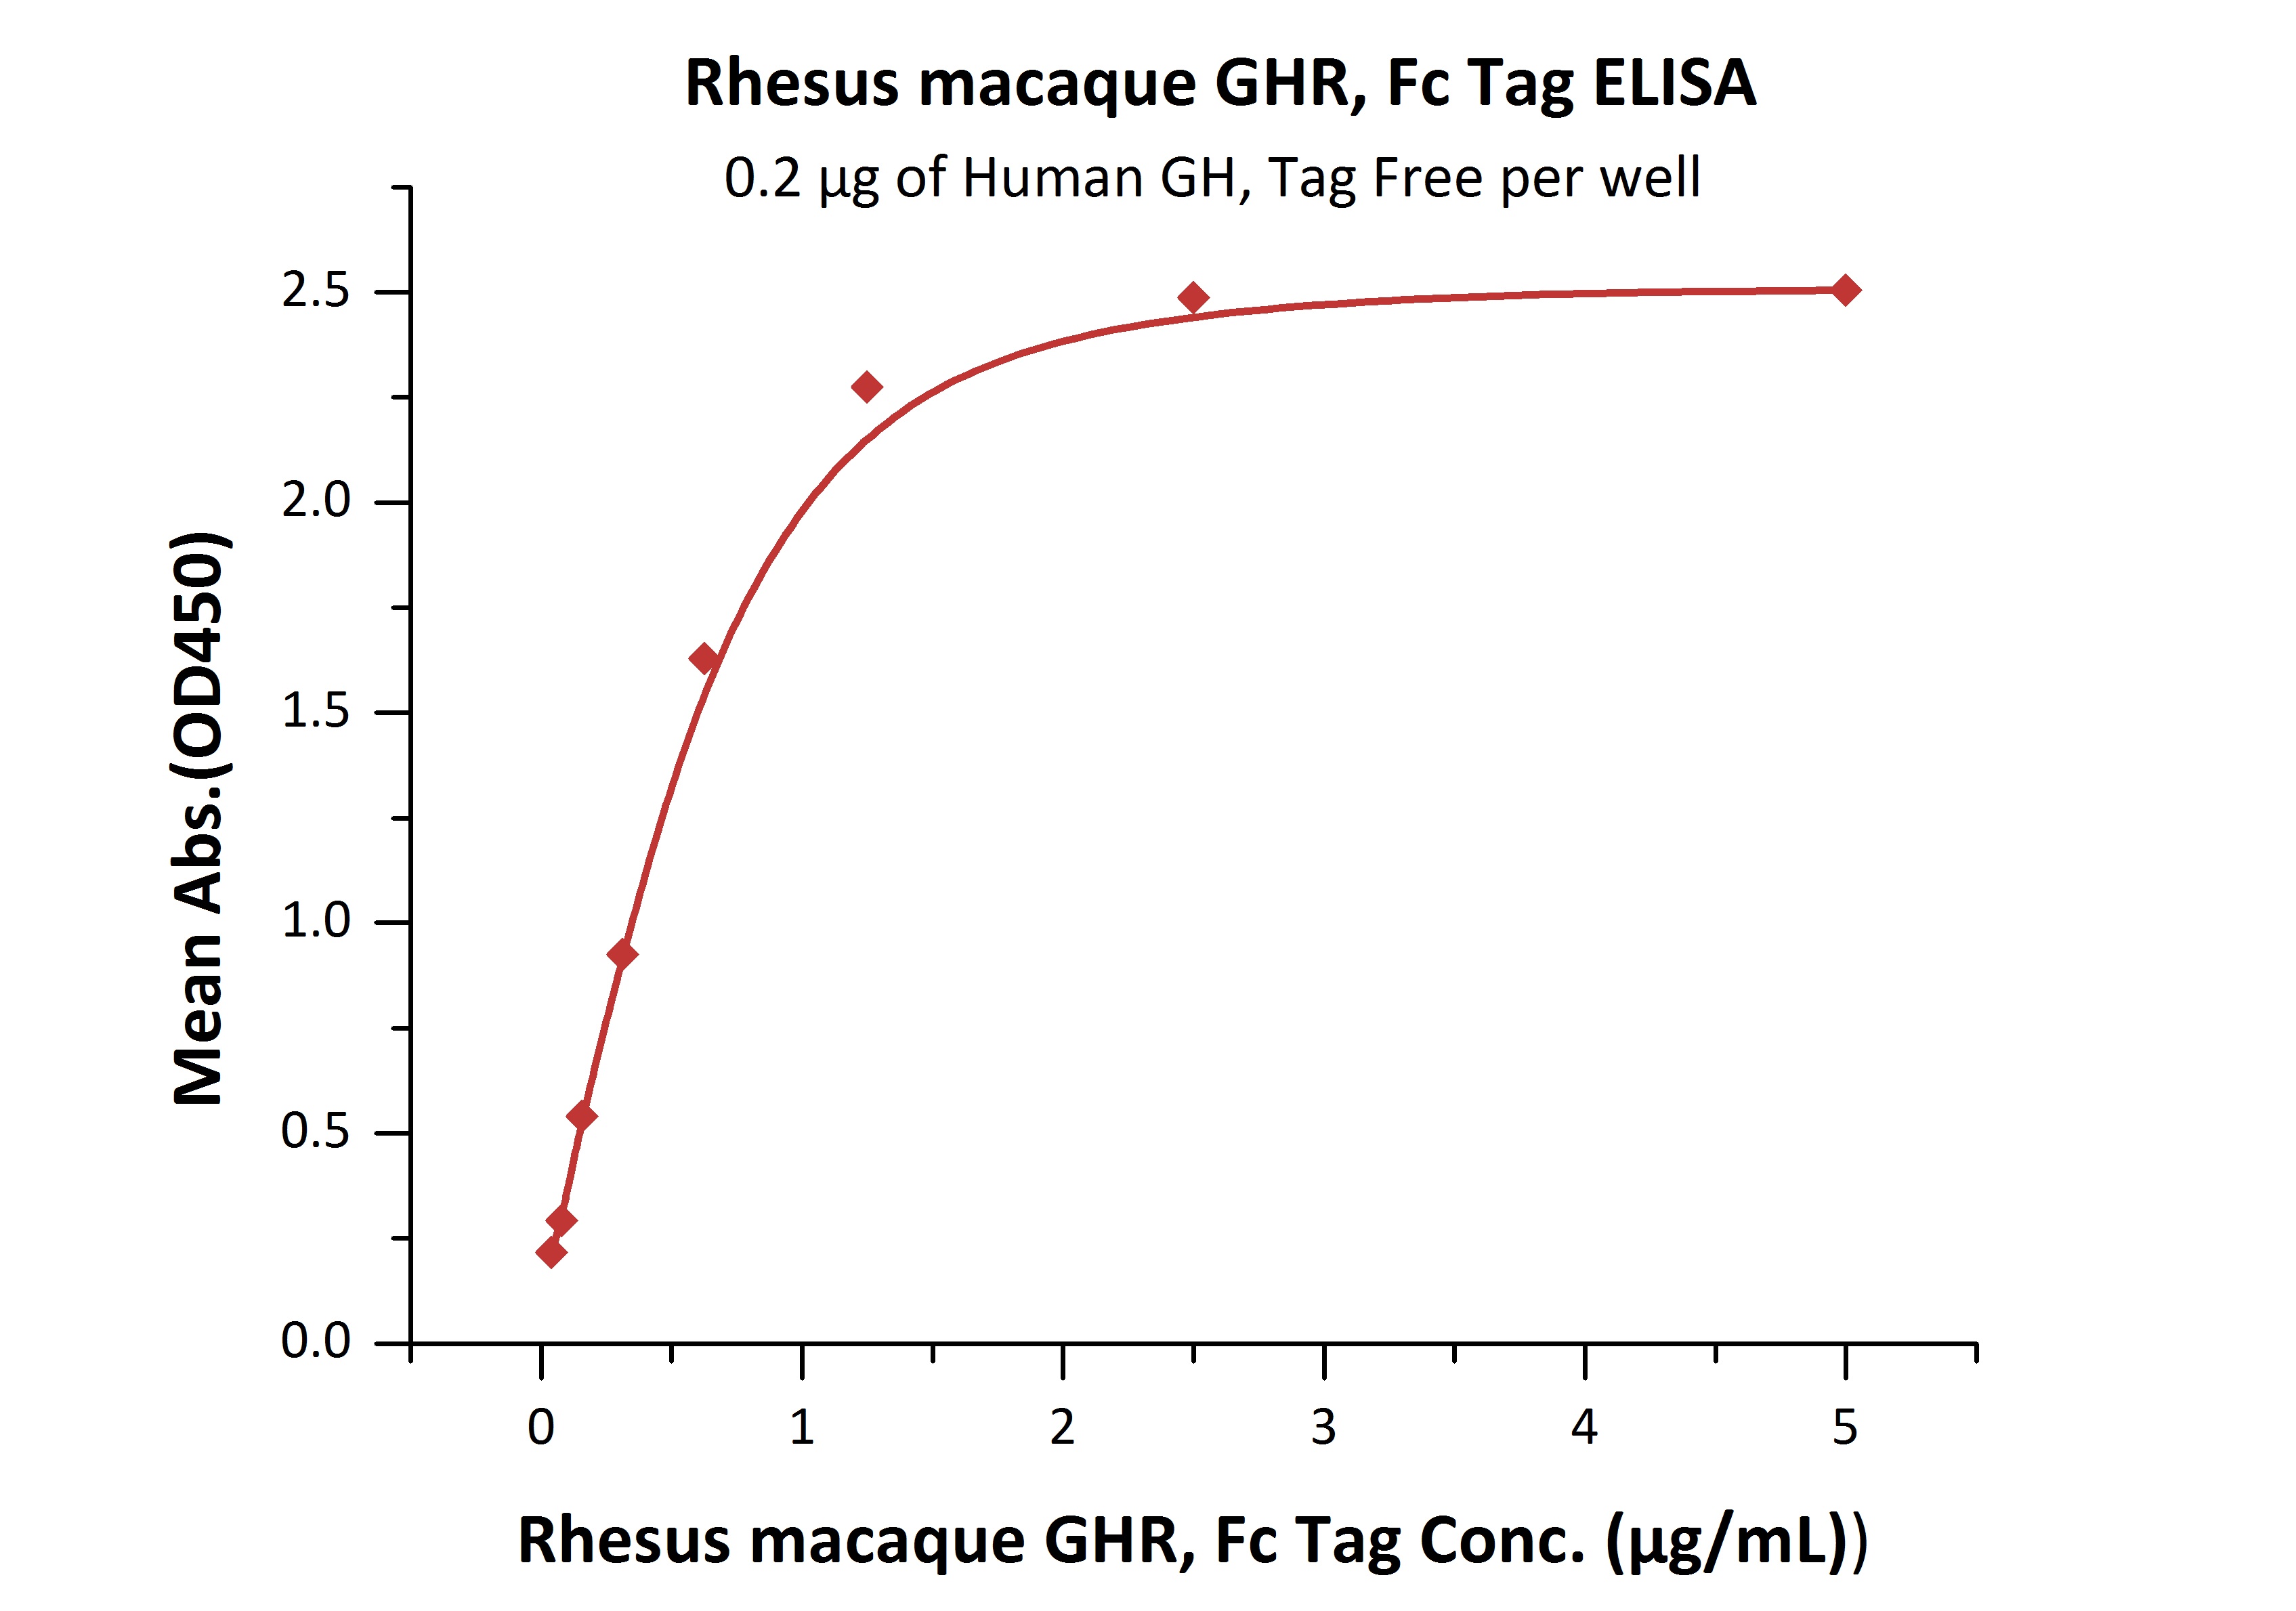 Rhesus macaque Growth Hormone R (GHR) Recombinant Protein